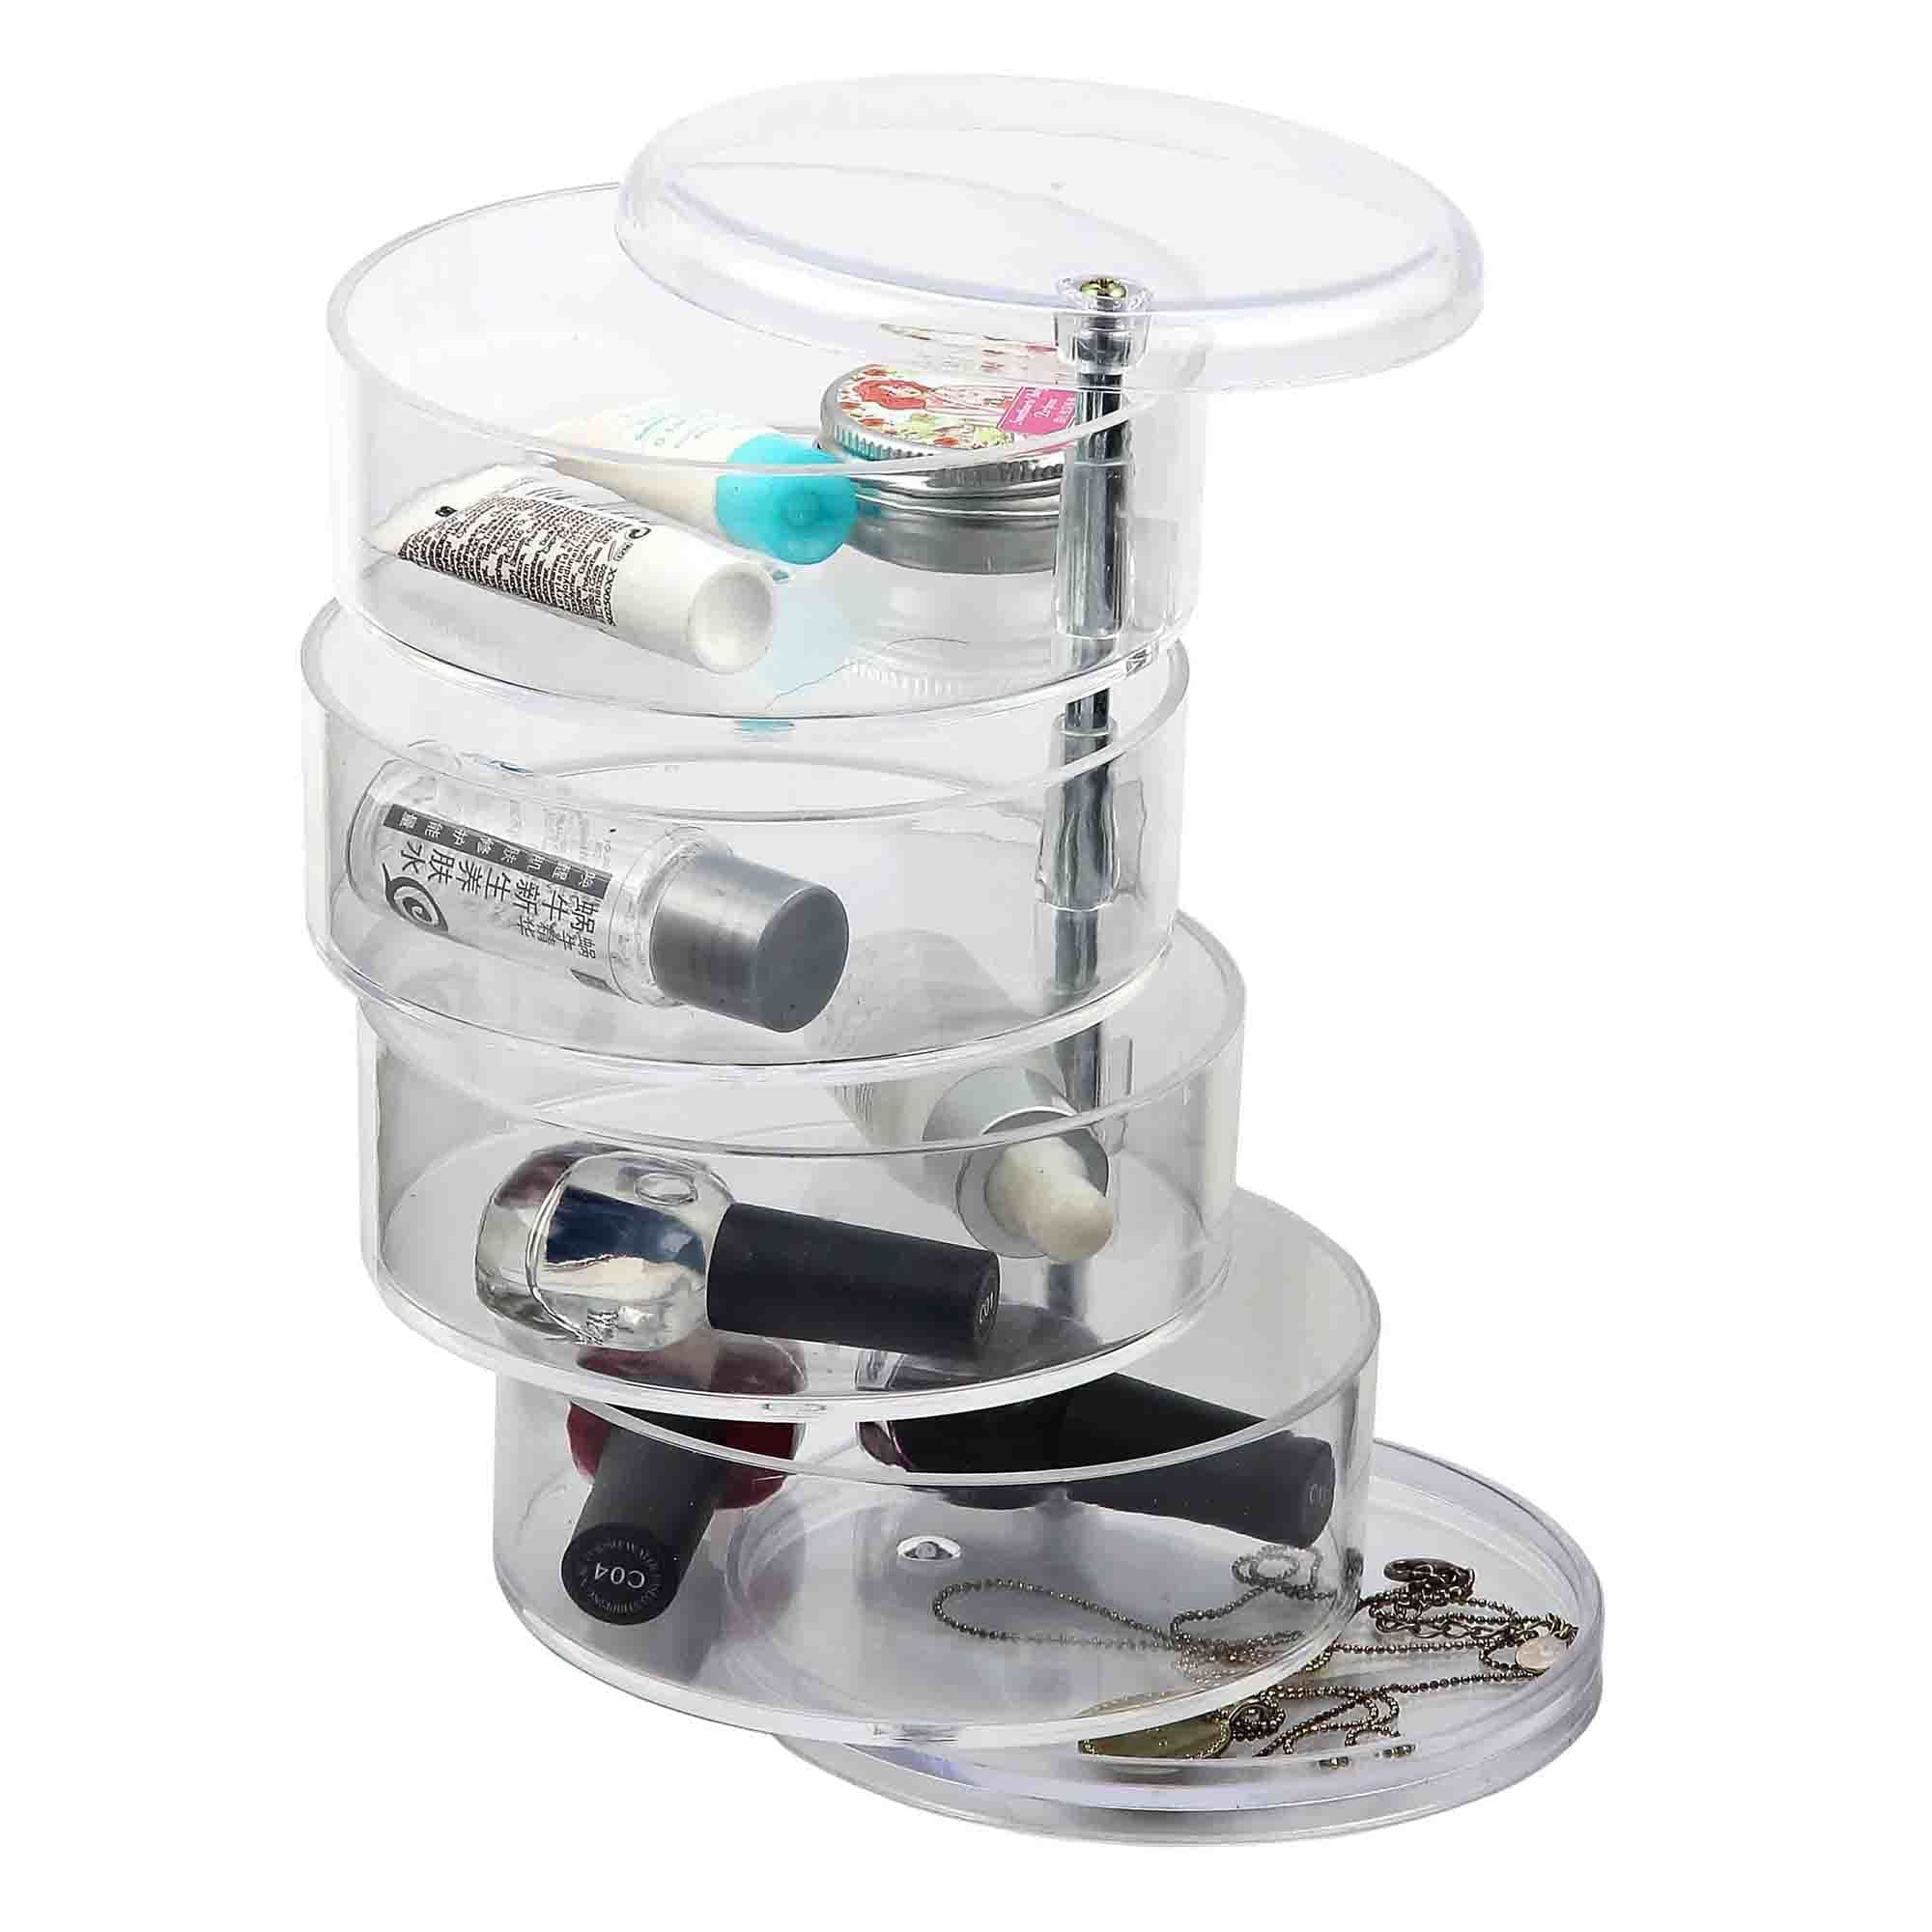 Home Basics 4-Section Swivel Jewelry Organizer, Clear $5.00 EACH, CASE PACK OF 12